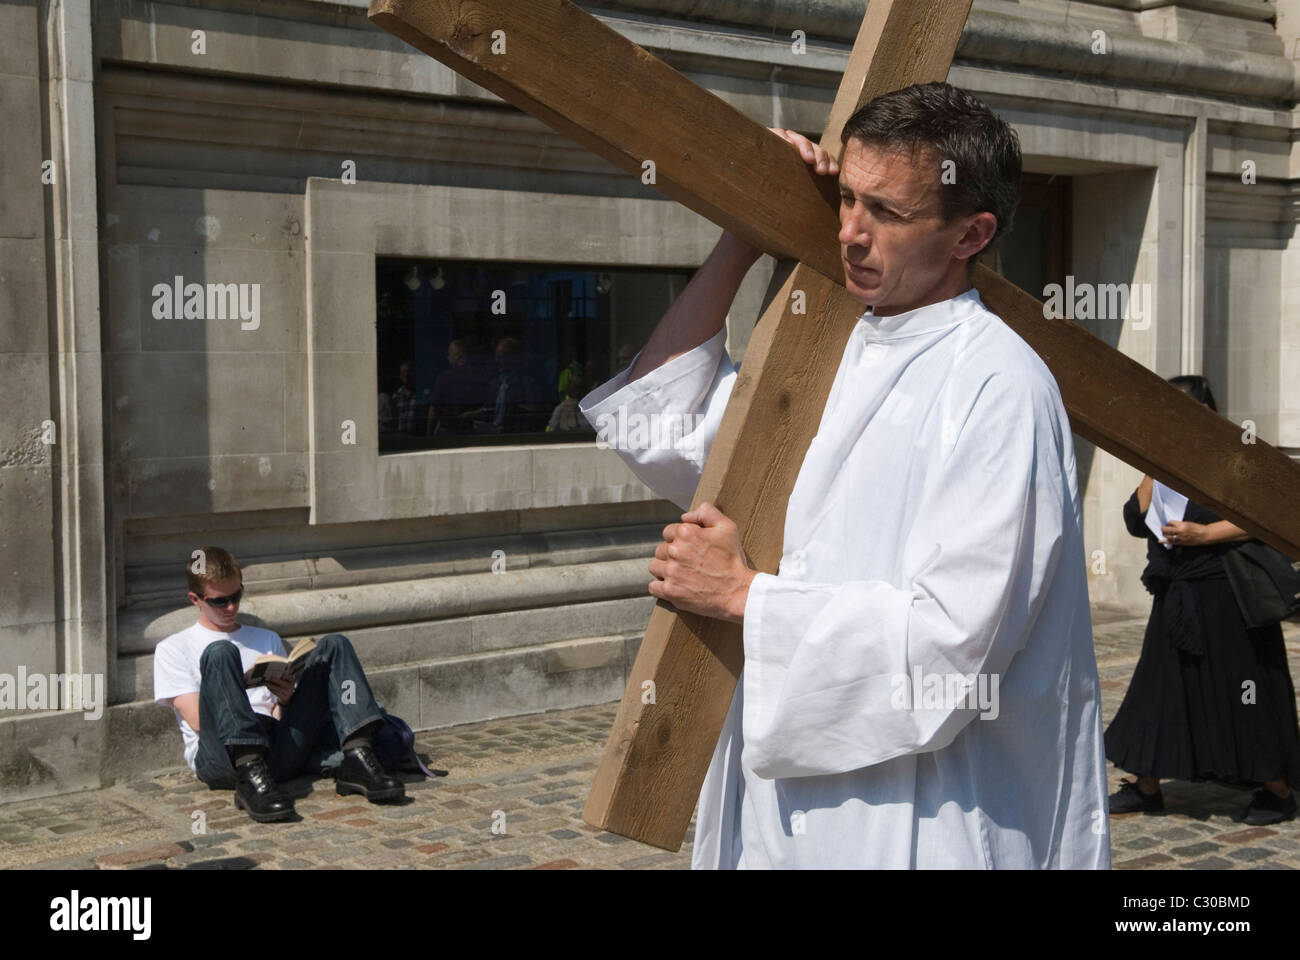 Good Friday Walk of Witness, Easter Good Friday. London UK. The Crucifixion on Victoria Street. HOMER SYKES Stock Photo